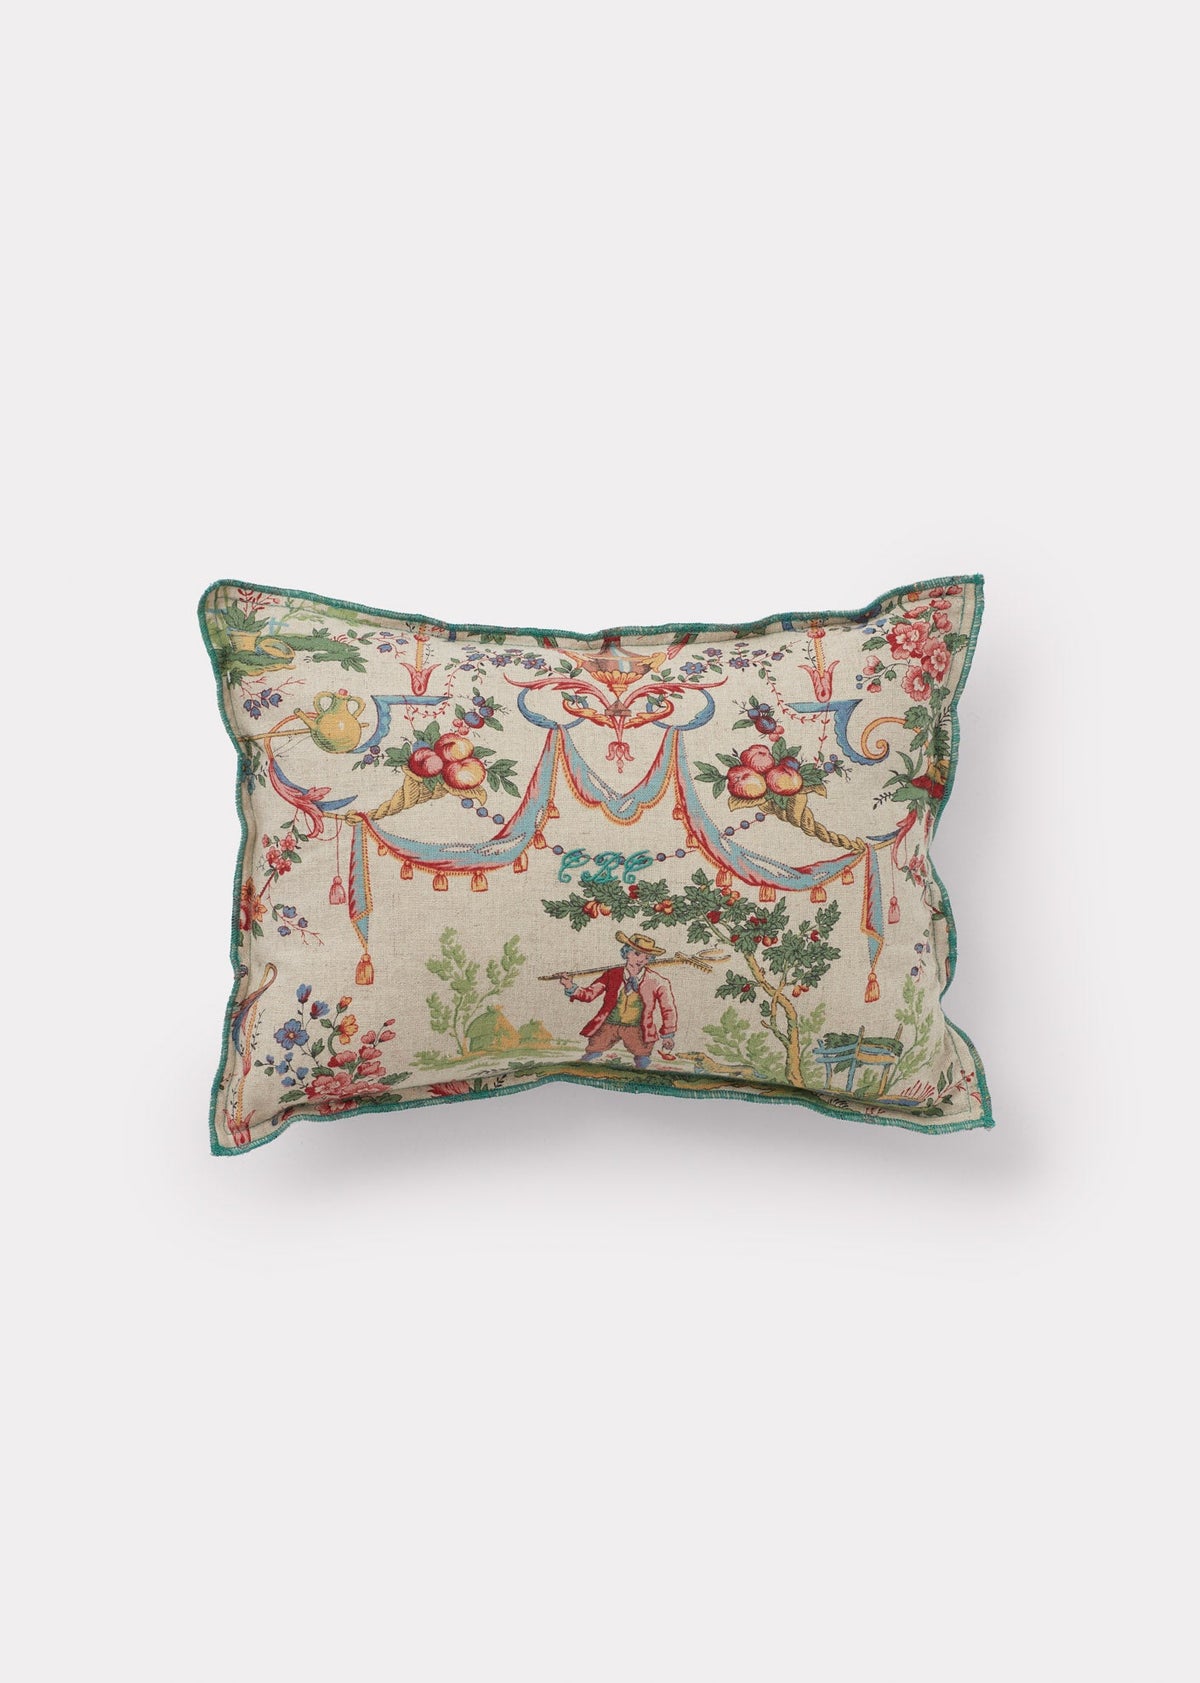 SCATTER CUSHION FRENCH VERSAILLE